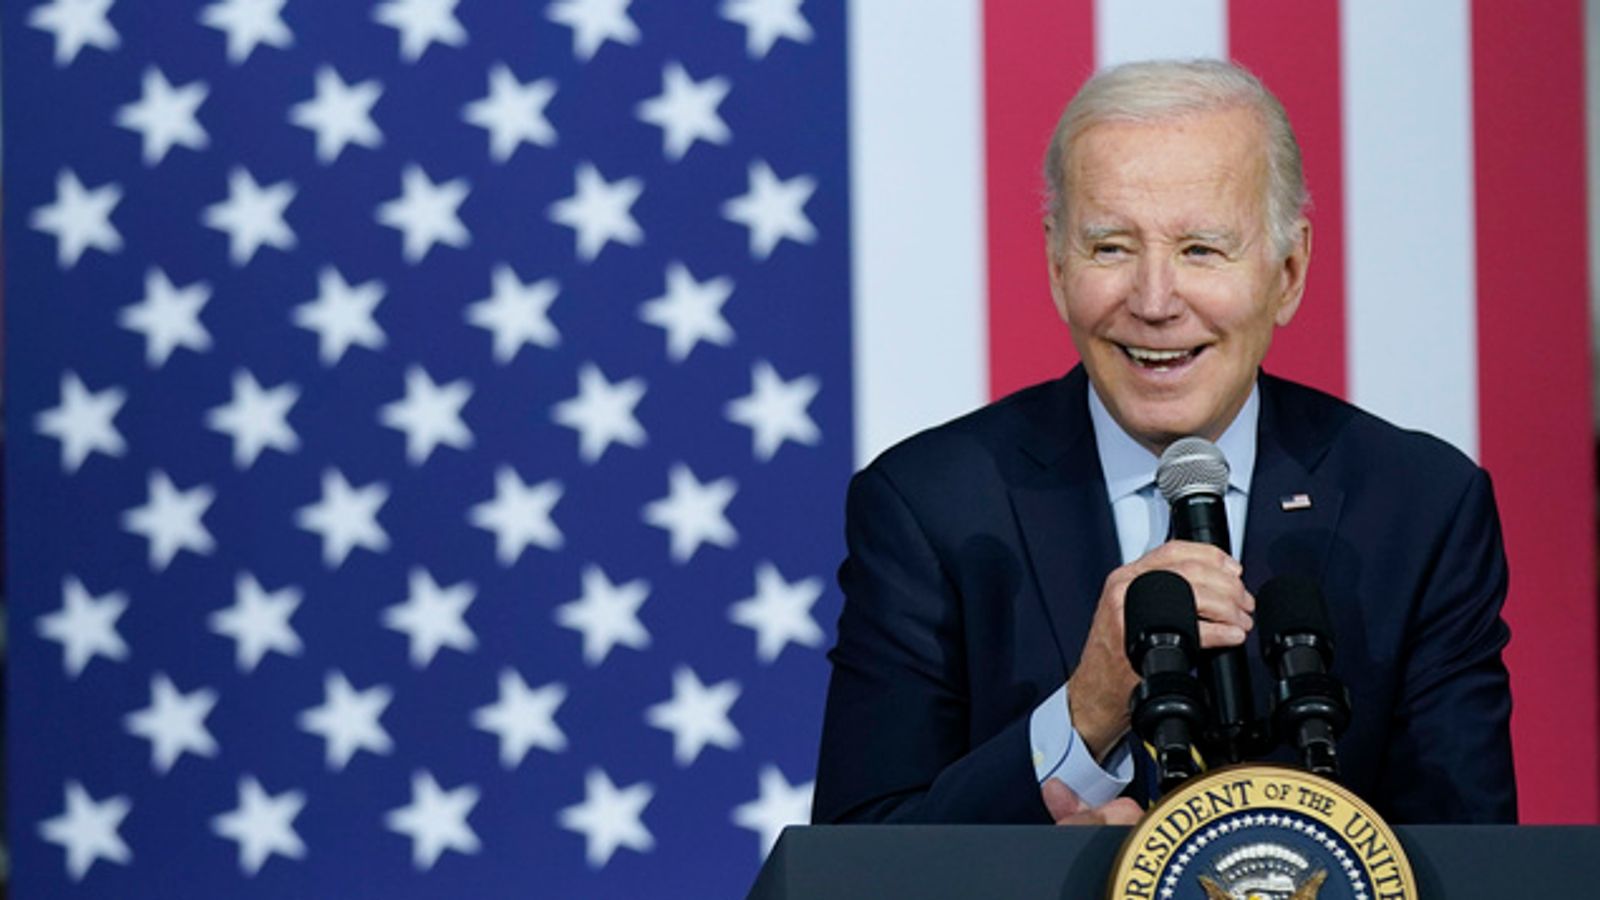 Joe Biden to announce he will run for a second term as US president next week - reports